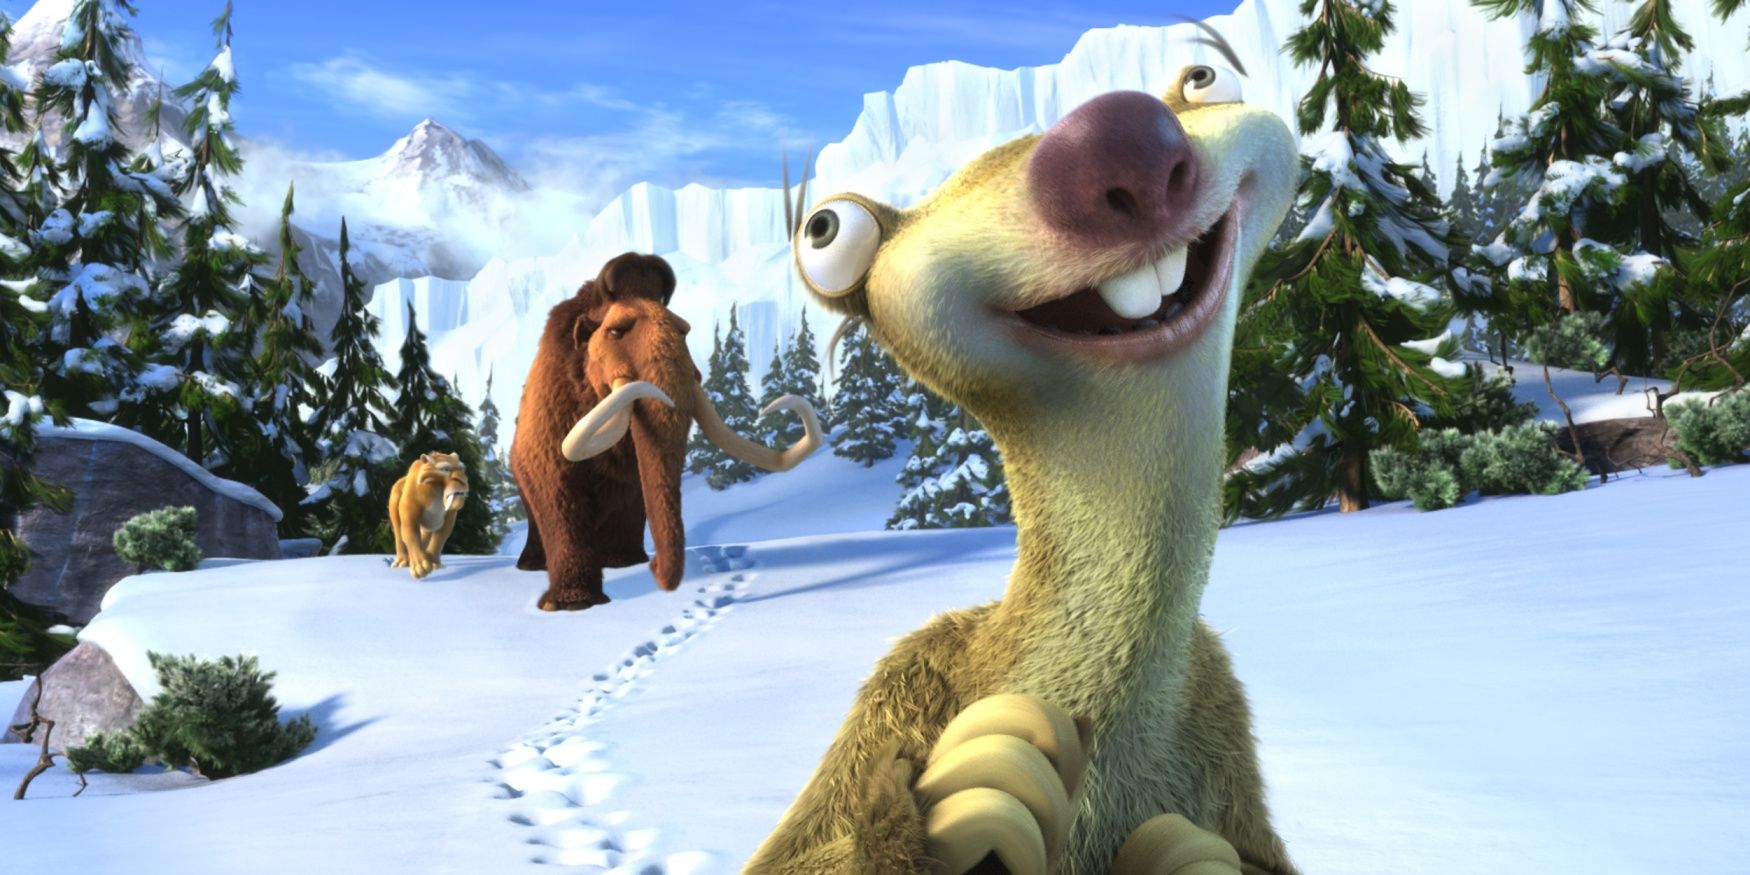 ice age 5 full movie watch online free